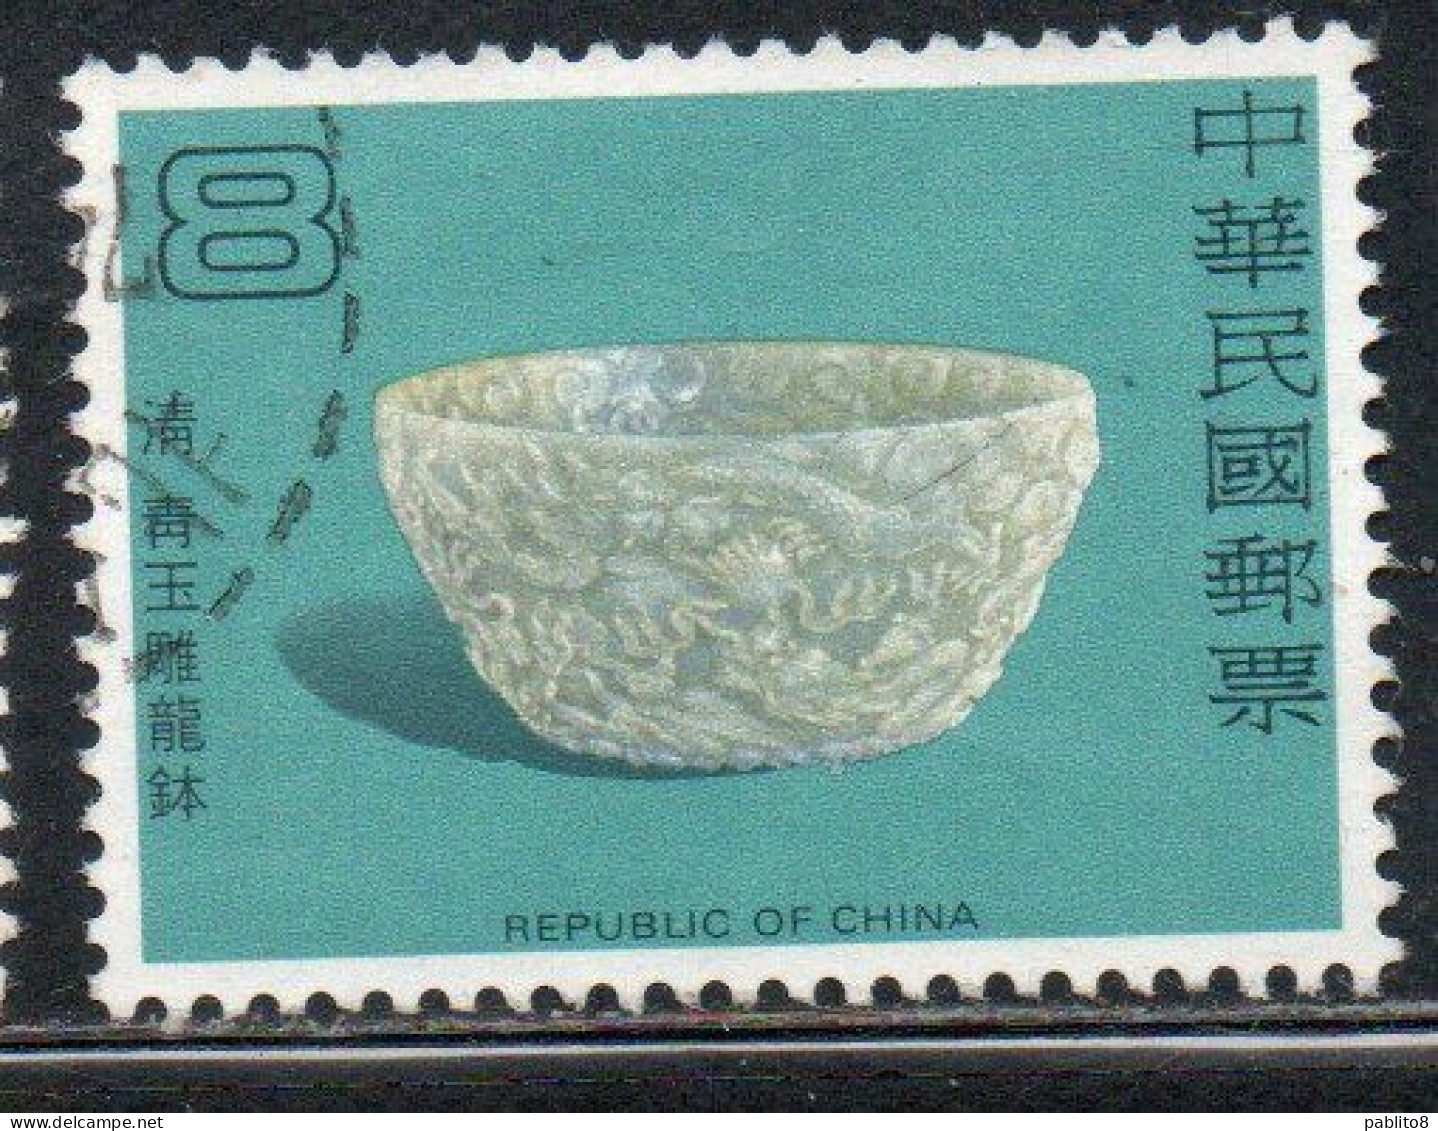 CHINA REPUBLIC CINA TAIWAN FORMOSA 1980 JADE POTTERY MONK'S ALMS BOWL CH'ING DYNASTY 8$ USED USATO OBLITERE' - Oblitérés